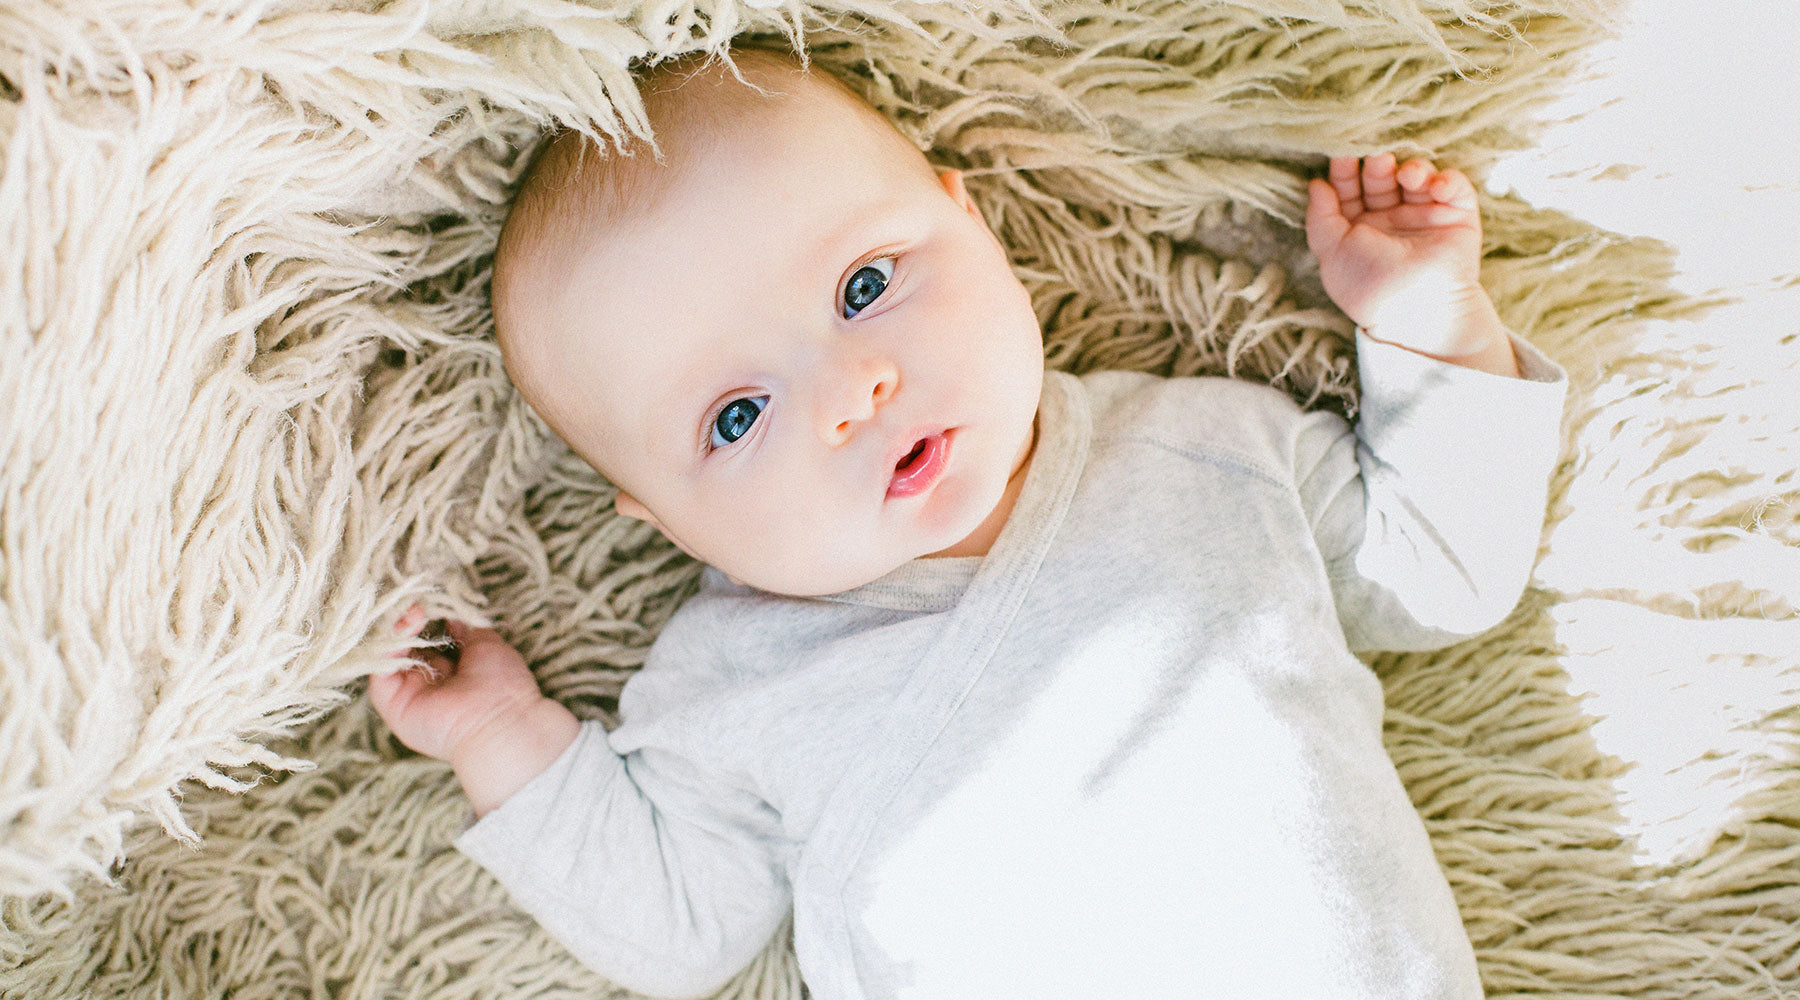 Cute Baby with Blue Eyes on Soft Blanket